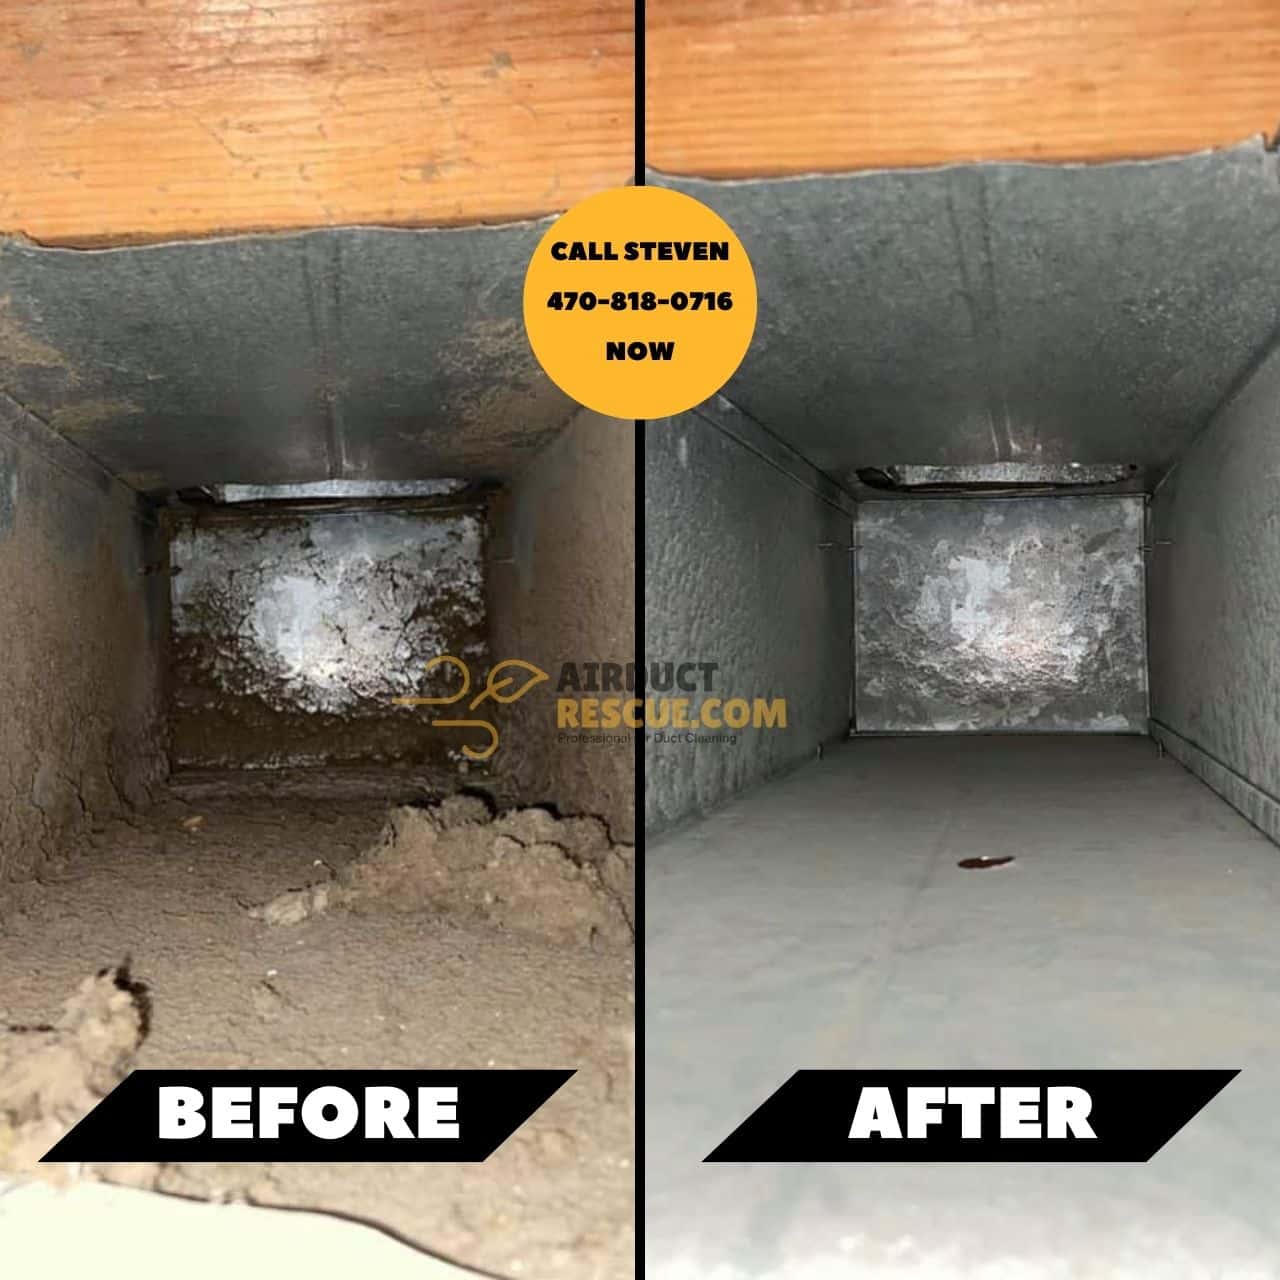 air duct & dryer vent cleaning in roswell, ga